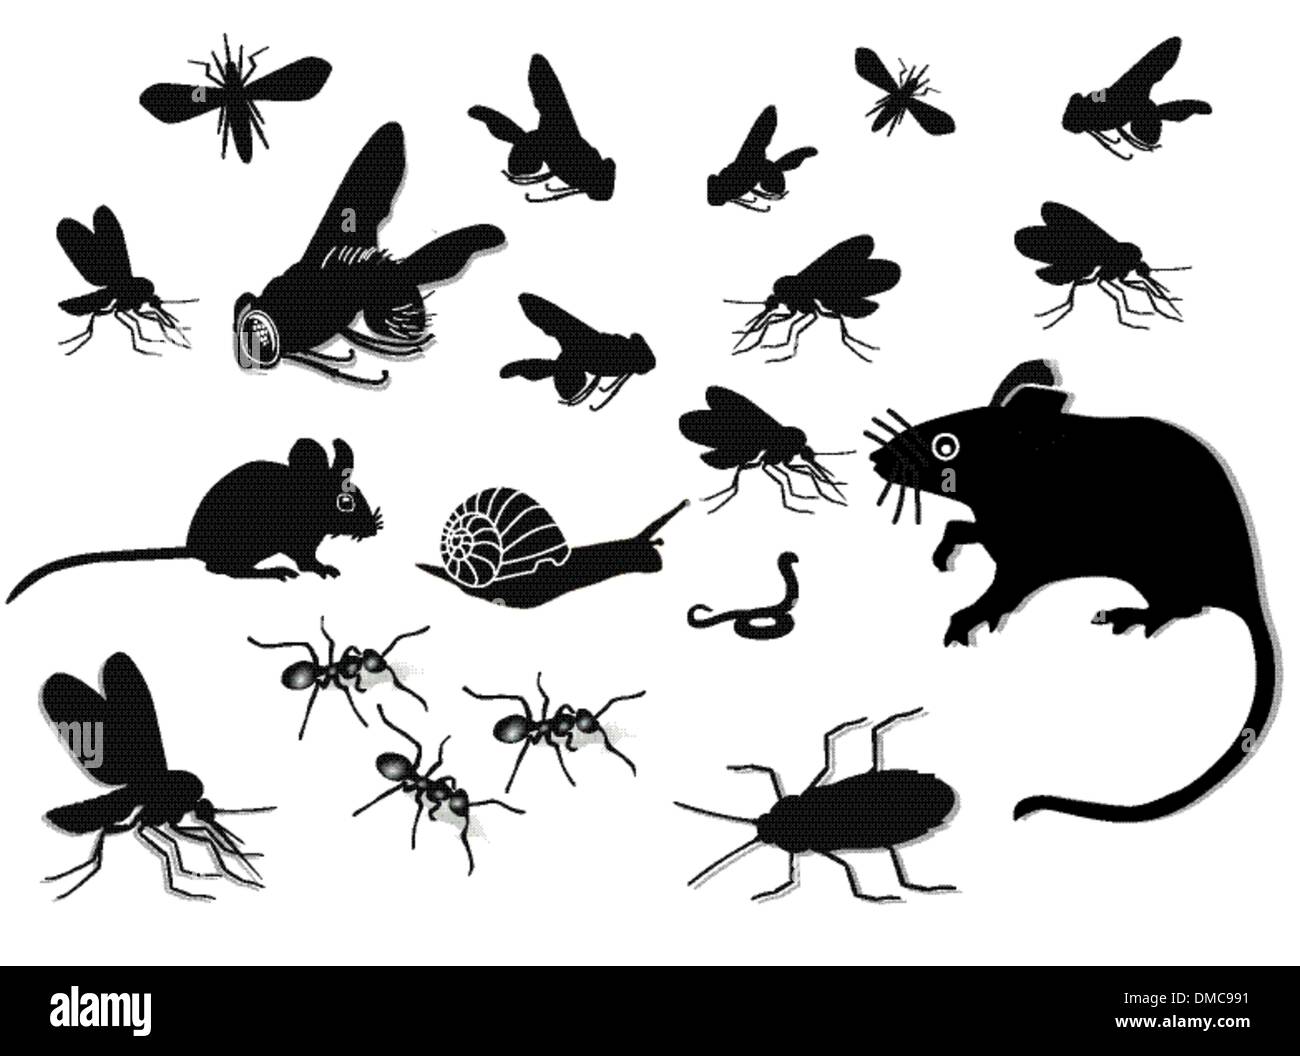 Pests and vermin Stock Vector